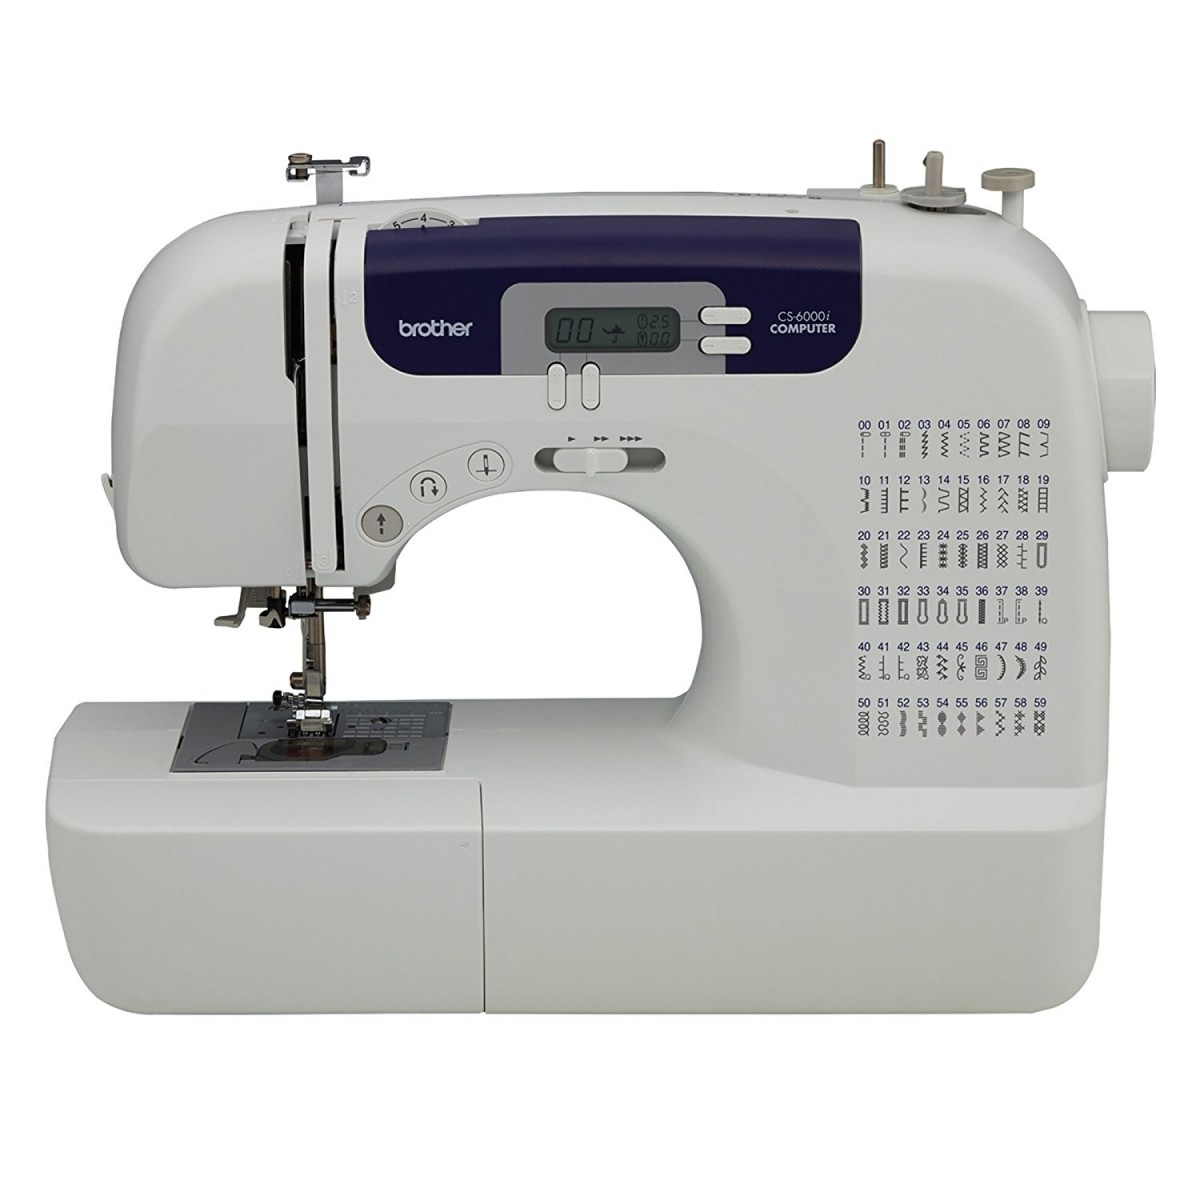 brother cs6000i sewing machine review